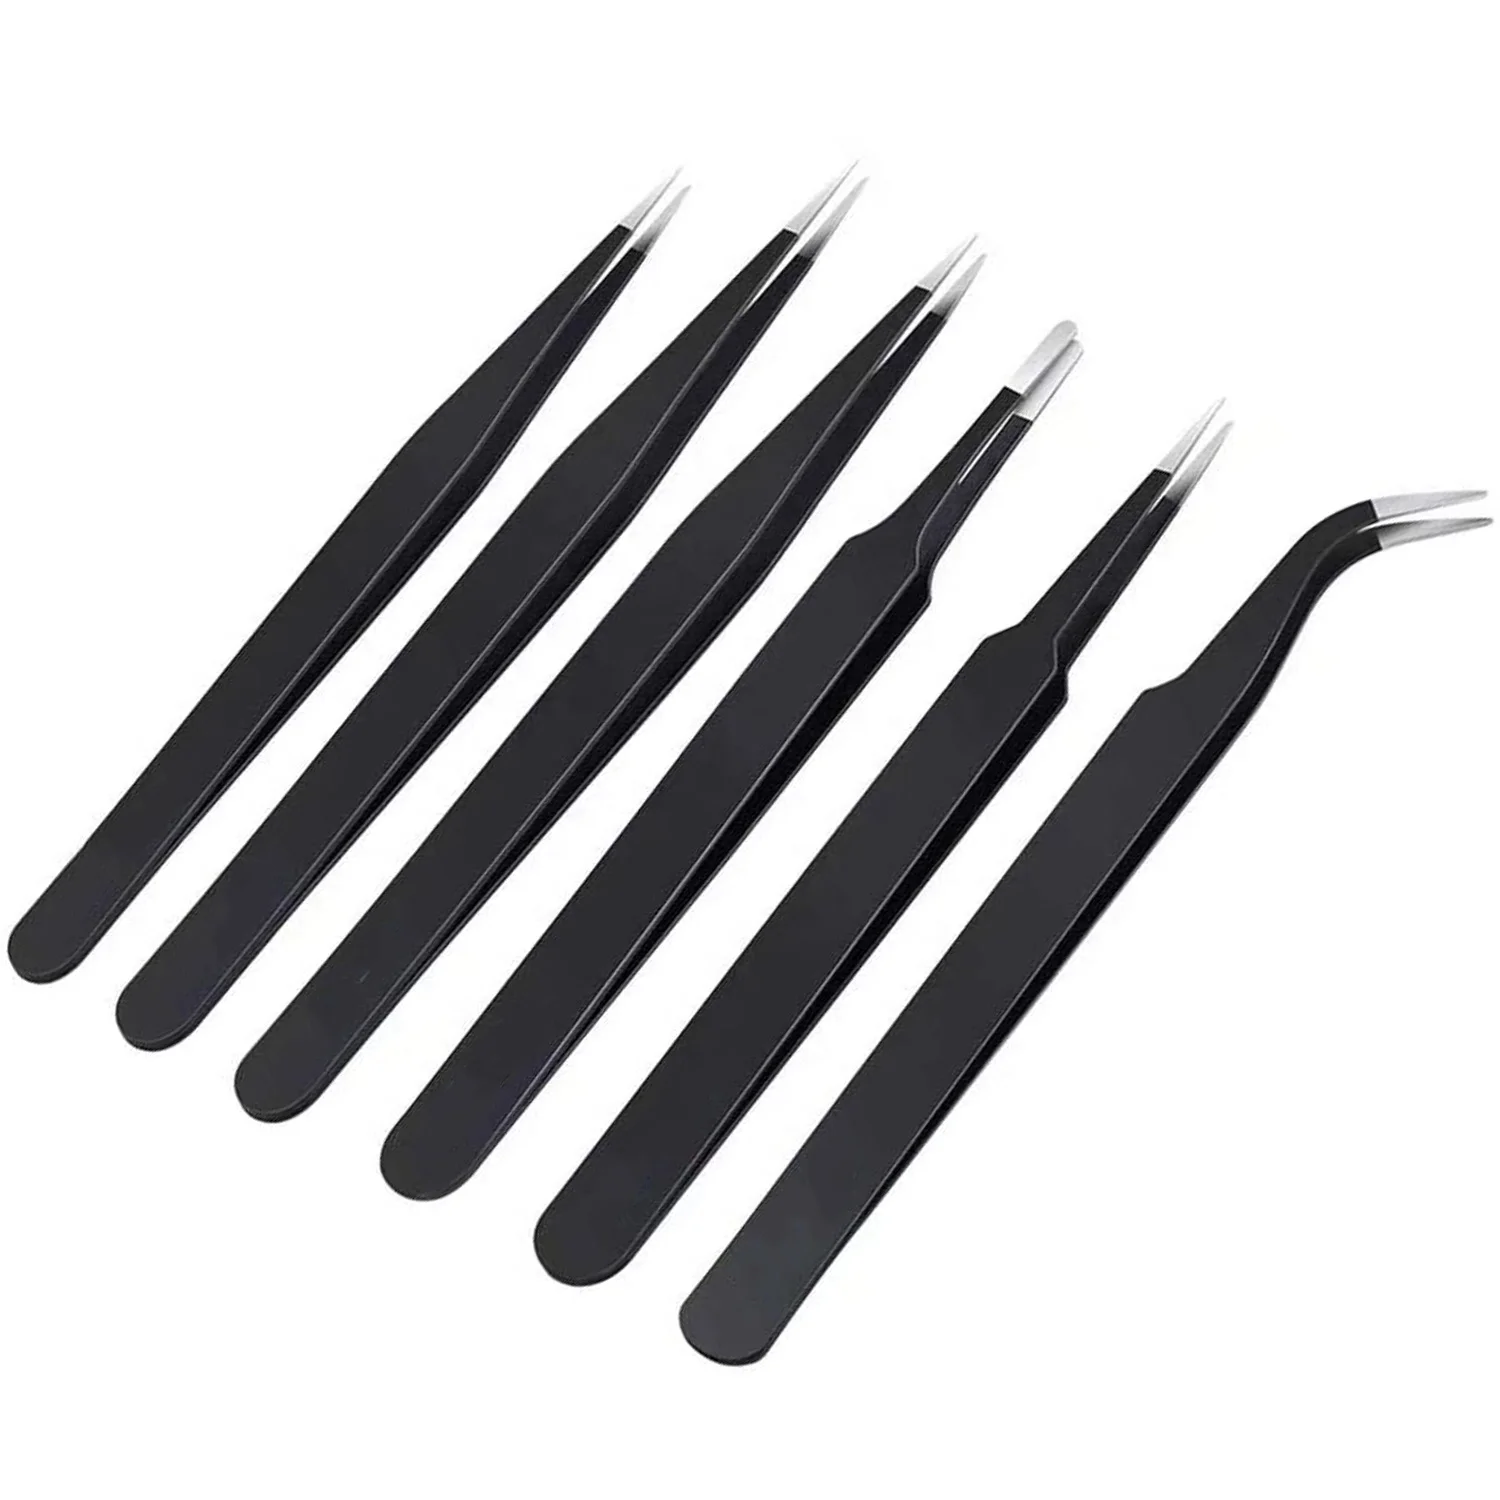 6PCS Precision Tweezers Set, Upgraded Anti-Static Stainless Steel Curved of  Tweezers, for Electronics, Laboratory Work, Jewelry-Making, Craft